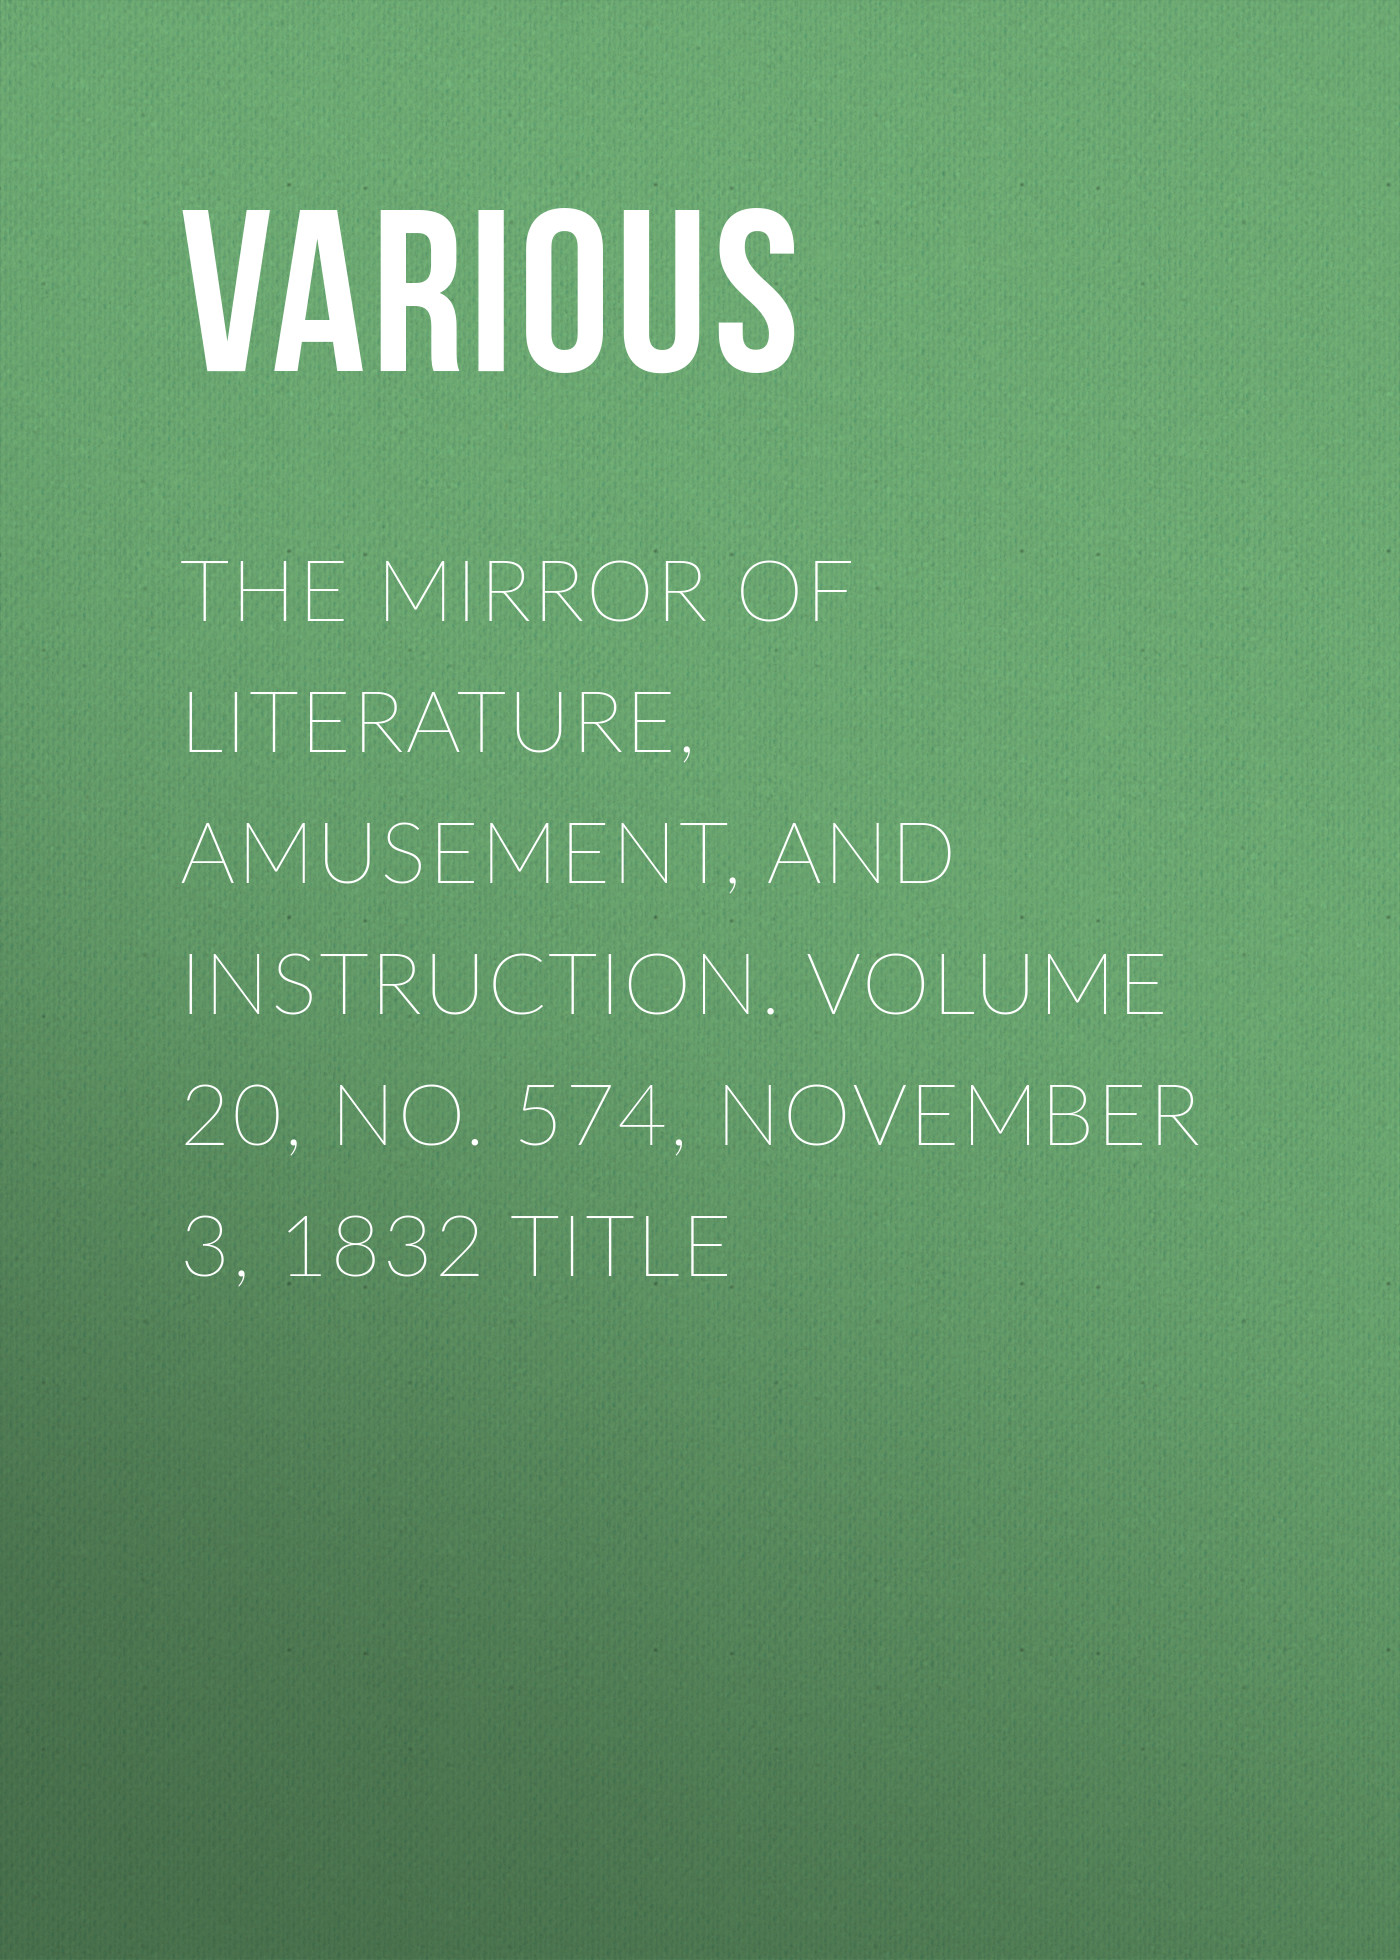 The Mirror of Literature, Amusement, and Instruction. Volume 20, No. 574, November 3, 1832 Title